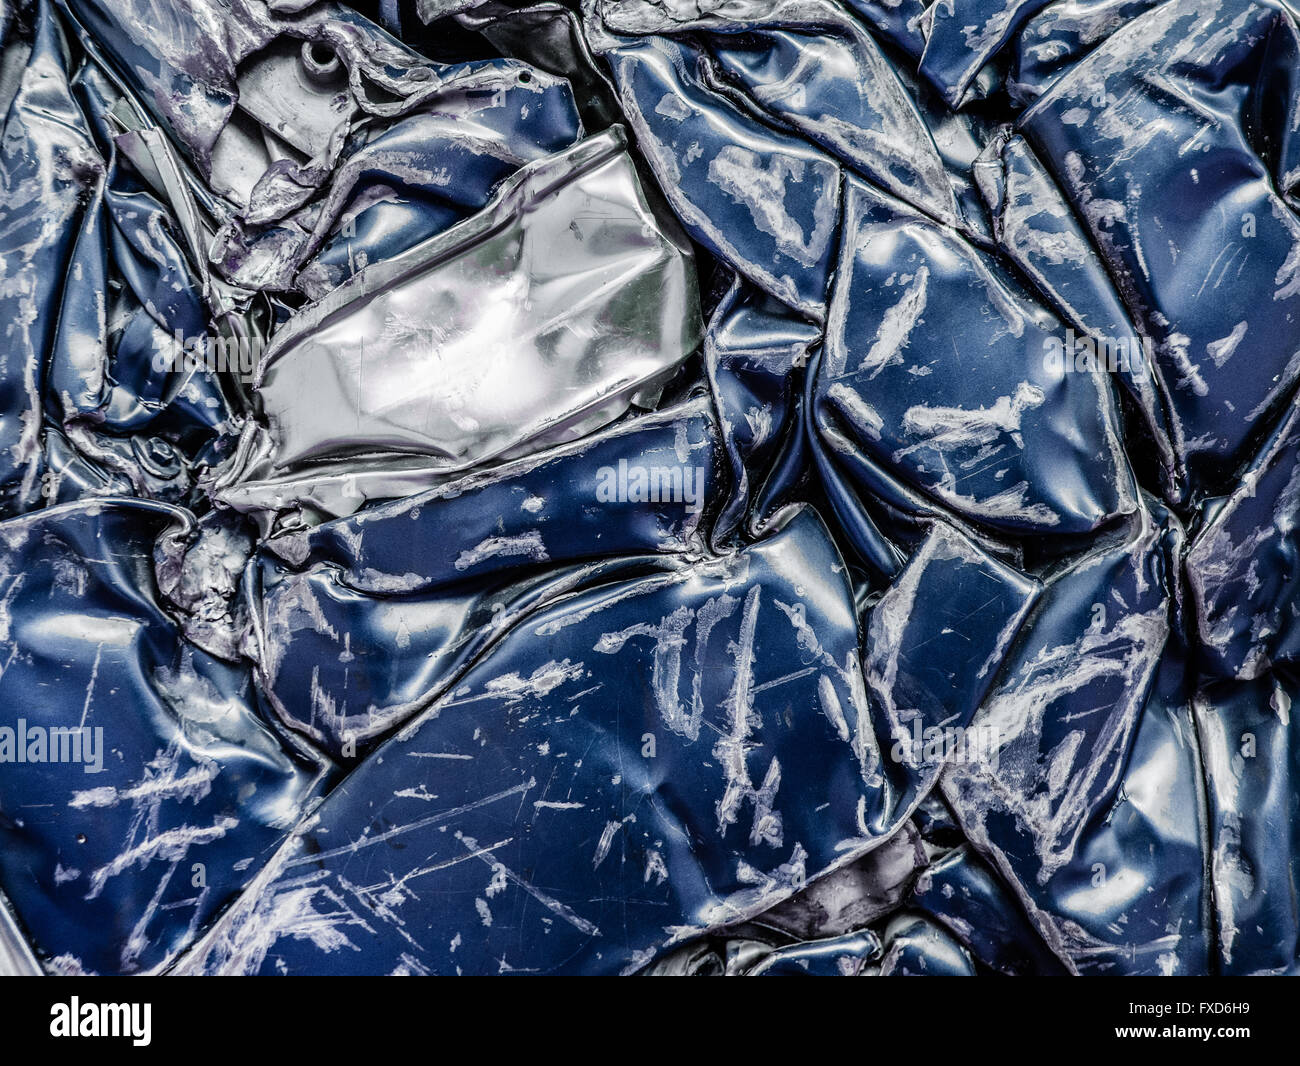 Background Texture Of Crushed Blue Steel Car Flattened In A Junkyard Stock Photo